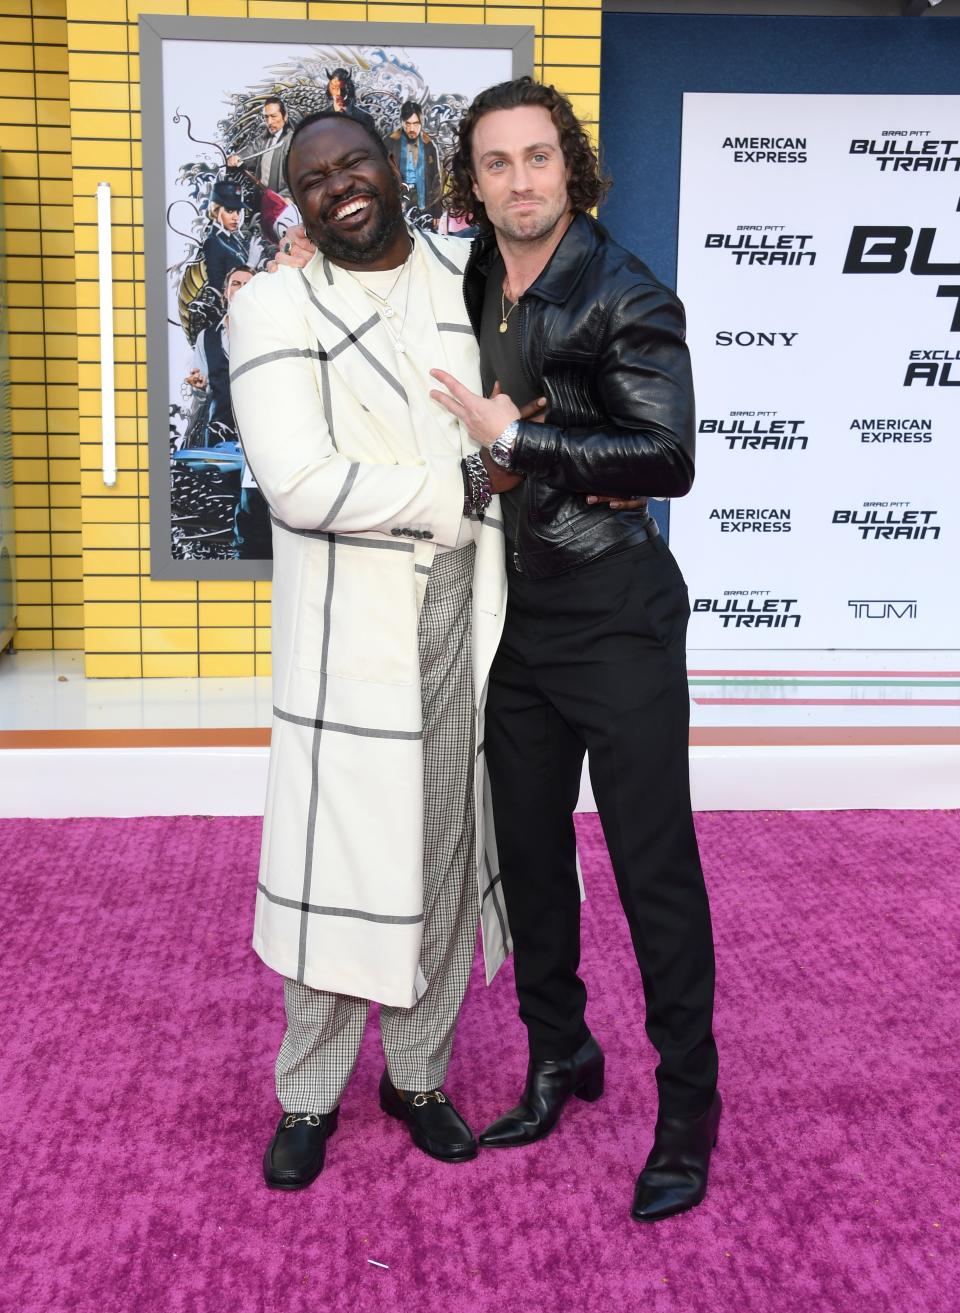 Brian Tyree Henry (left) and Aaron Taylor-Johnson attend the Los Angeles premiere of "Bullet Train" at Regency Village Theatre in Los Angeles.